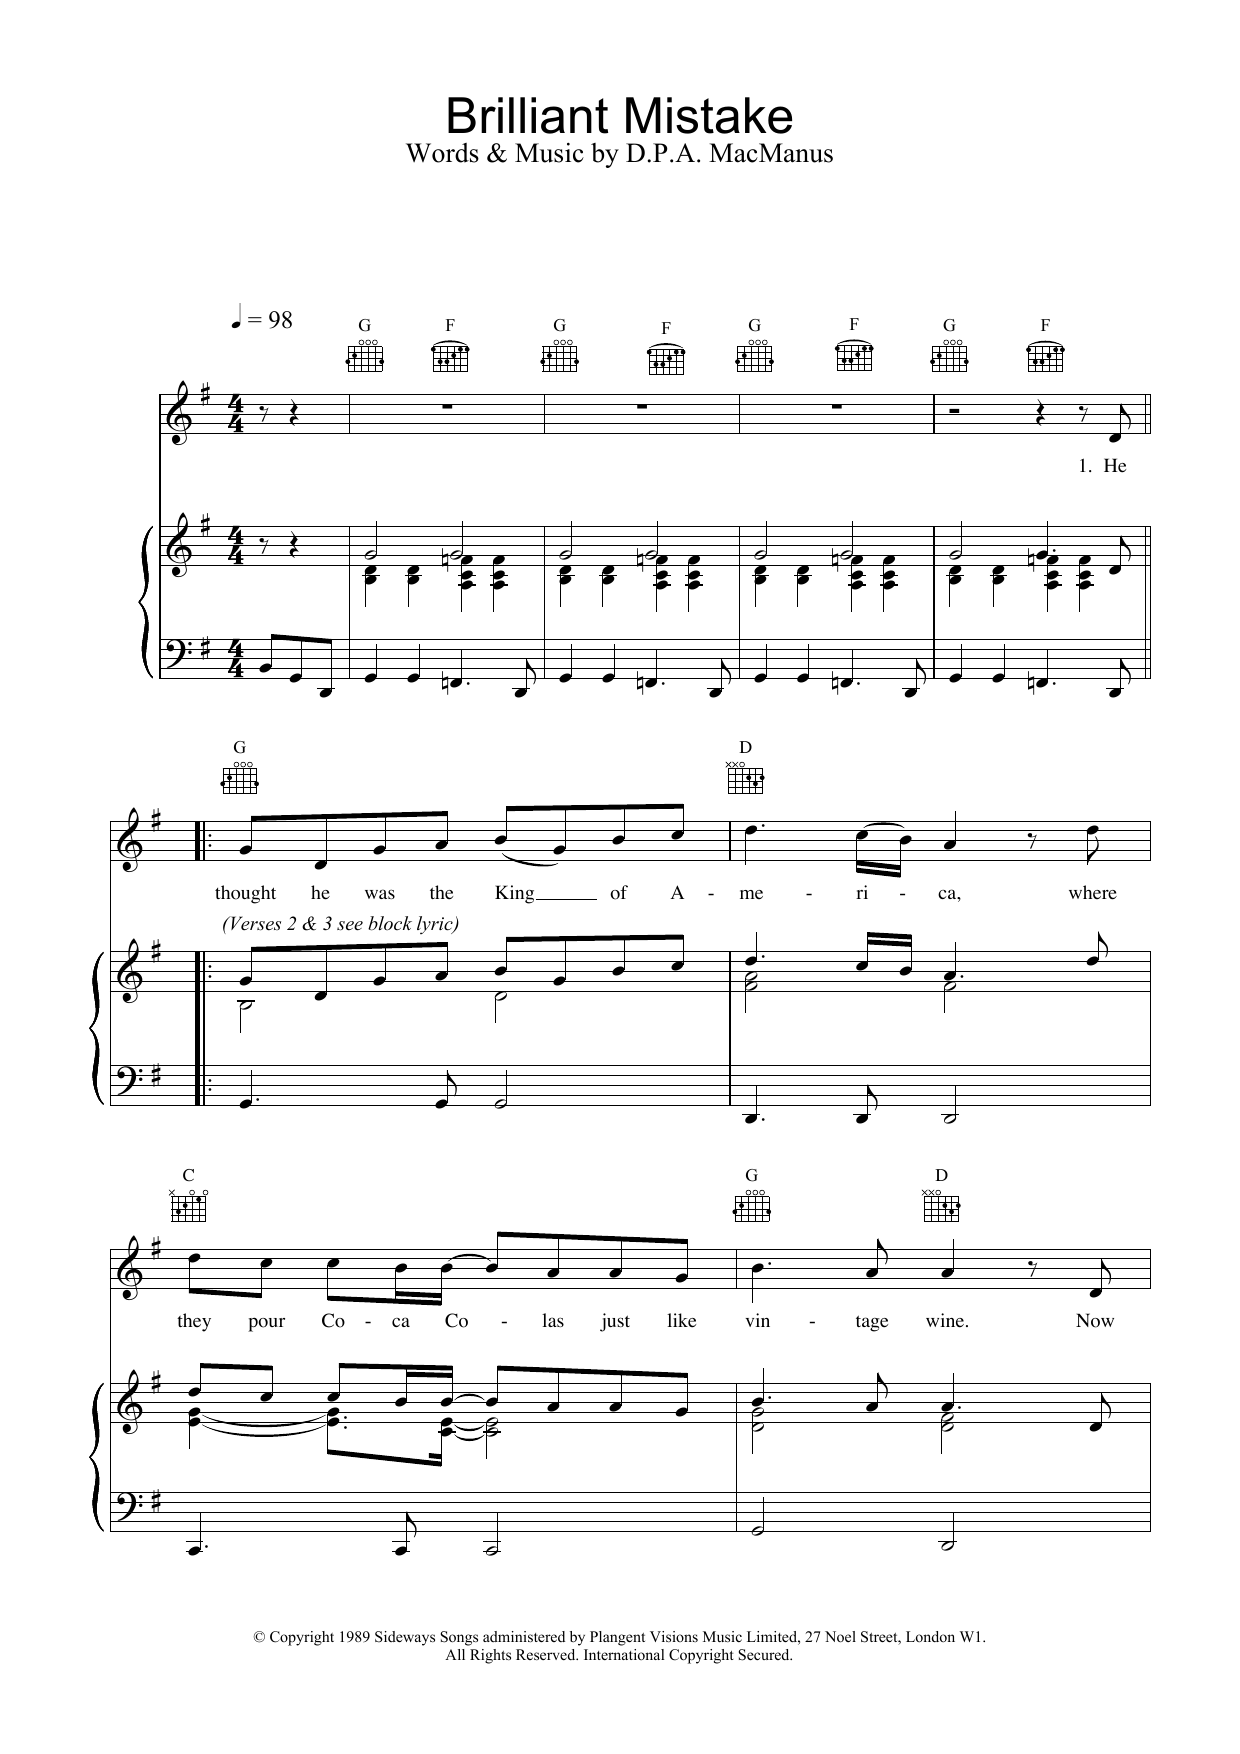 Elvis Costello Brilliant Mistake sheet music notes and chords. Download Printable PDF.